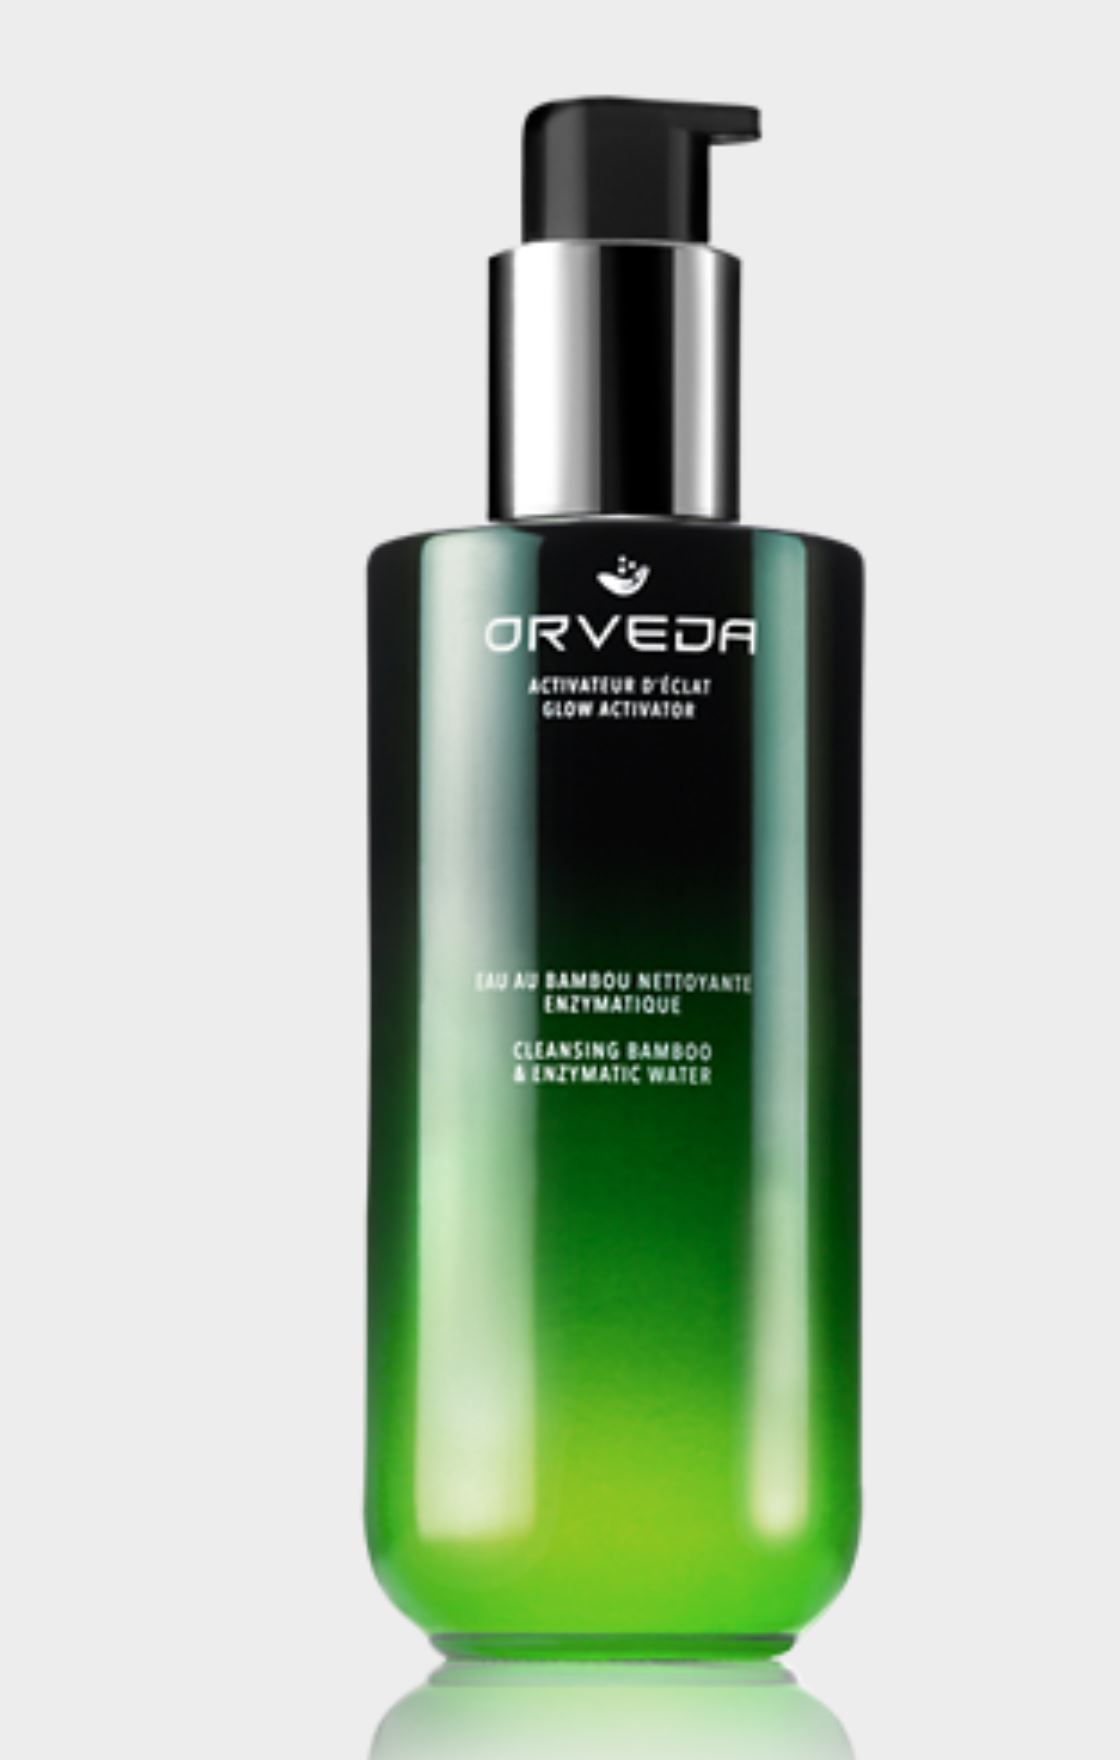 ORVEDA: CLEANSING BAMBOO ENZYMATIC WATER